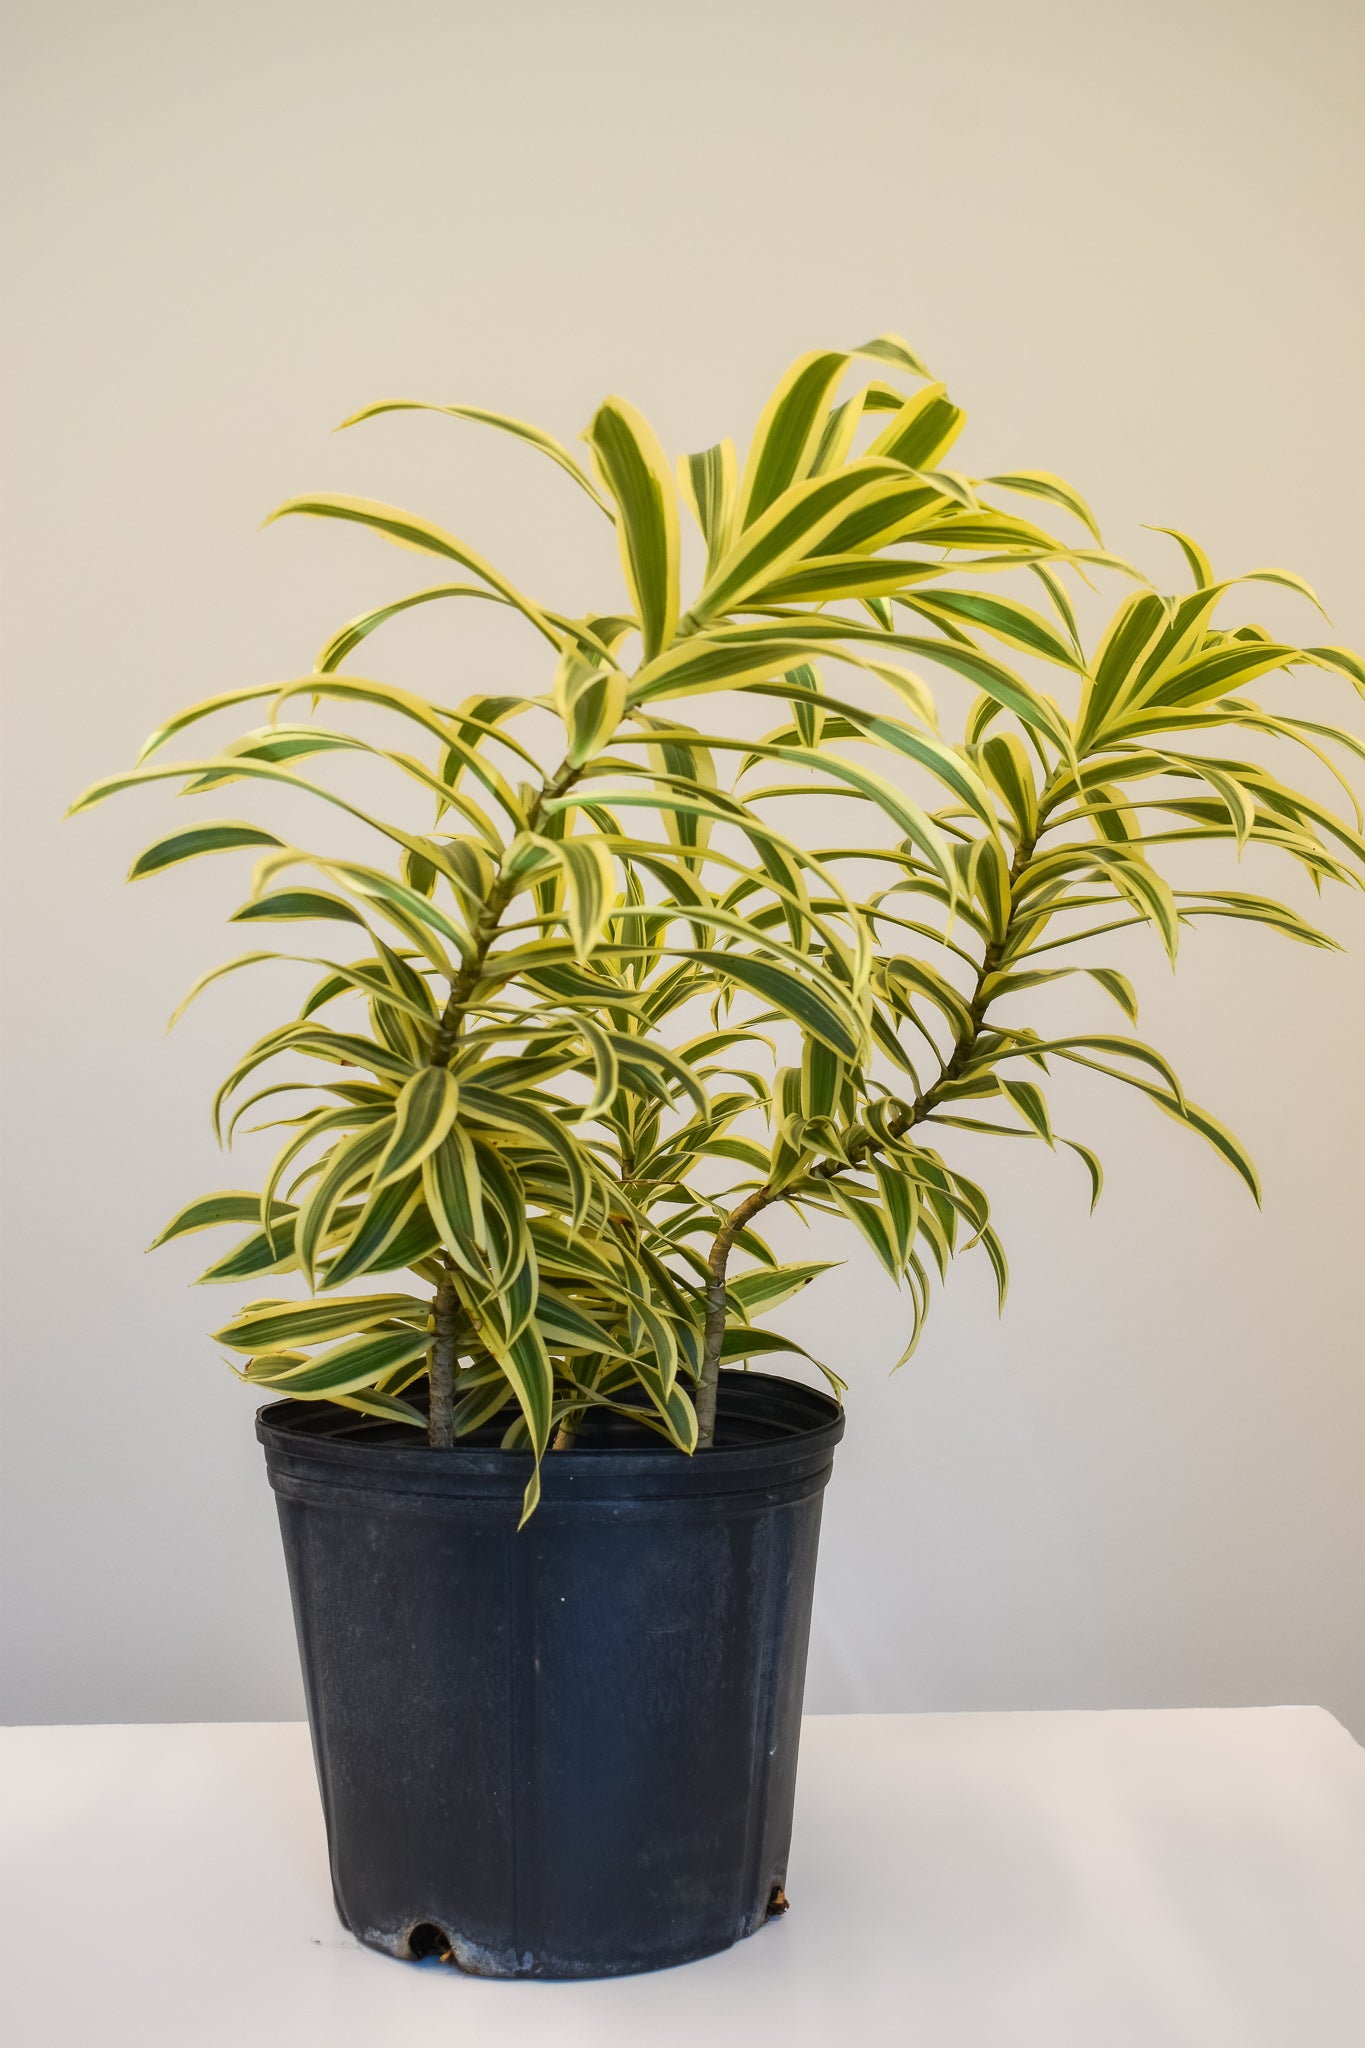 Song of India Dracaena - Belle's Greenhouse